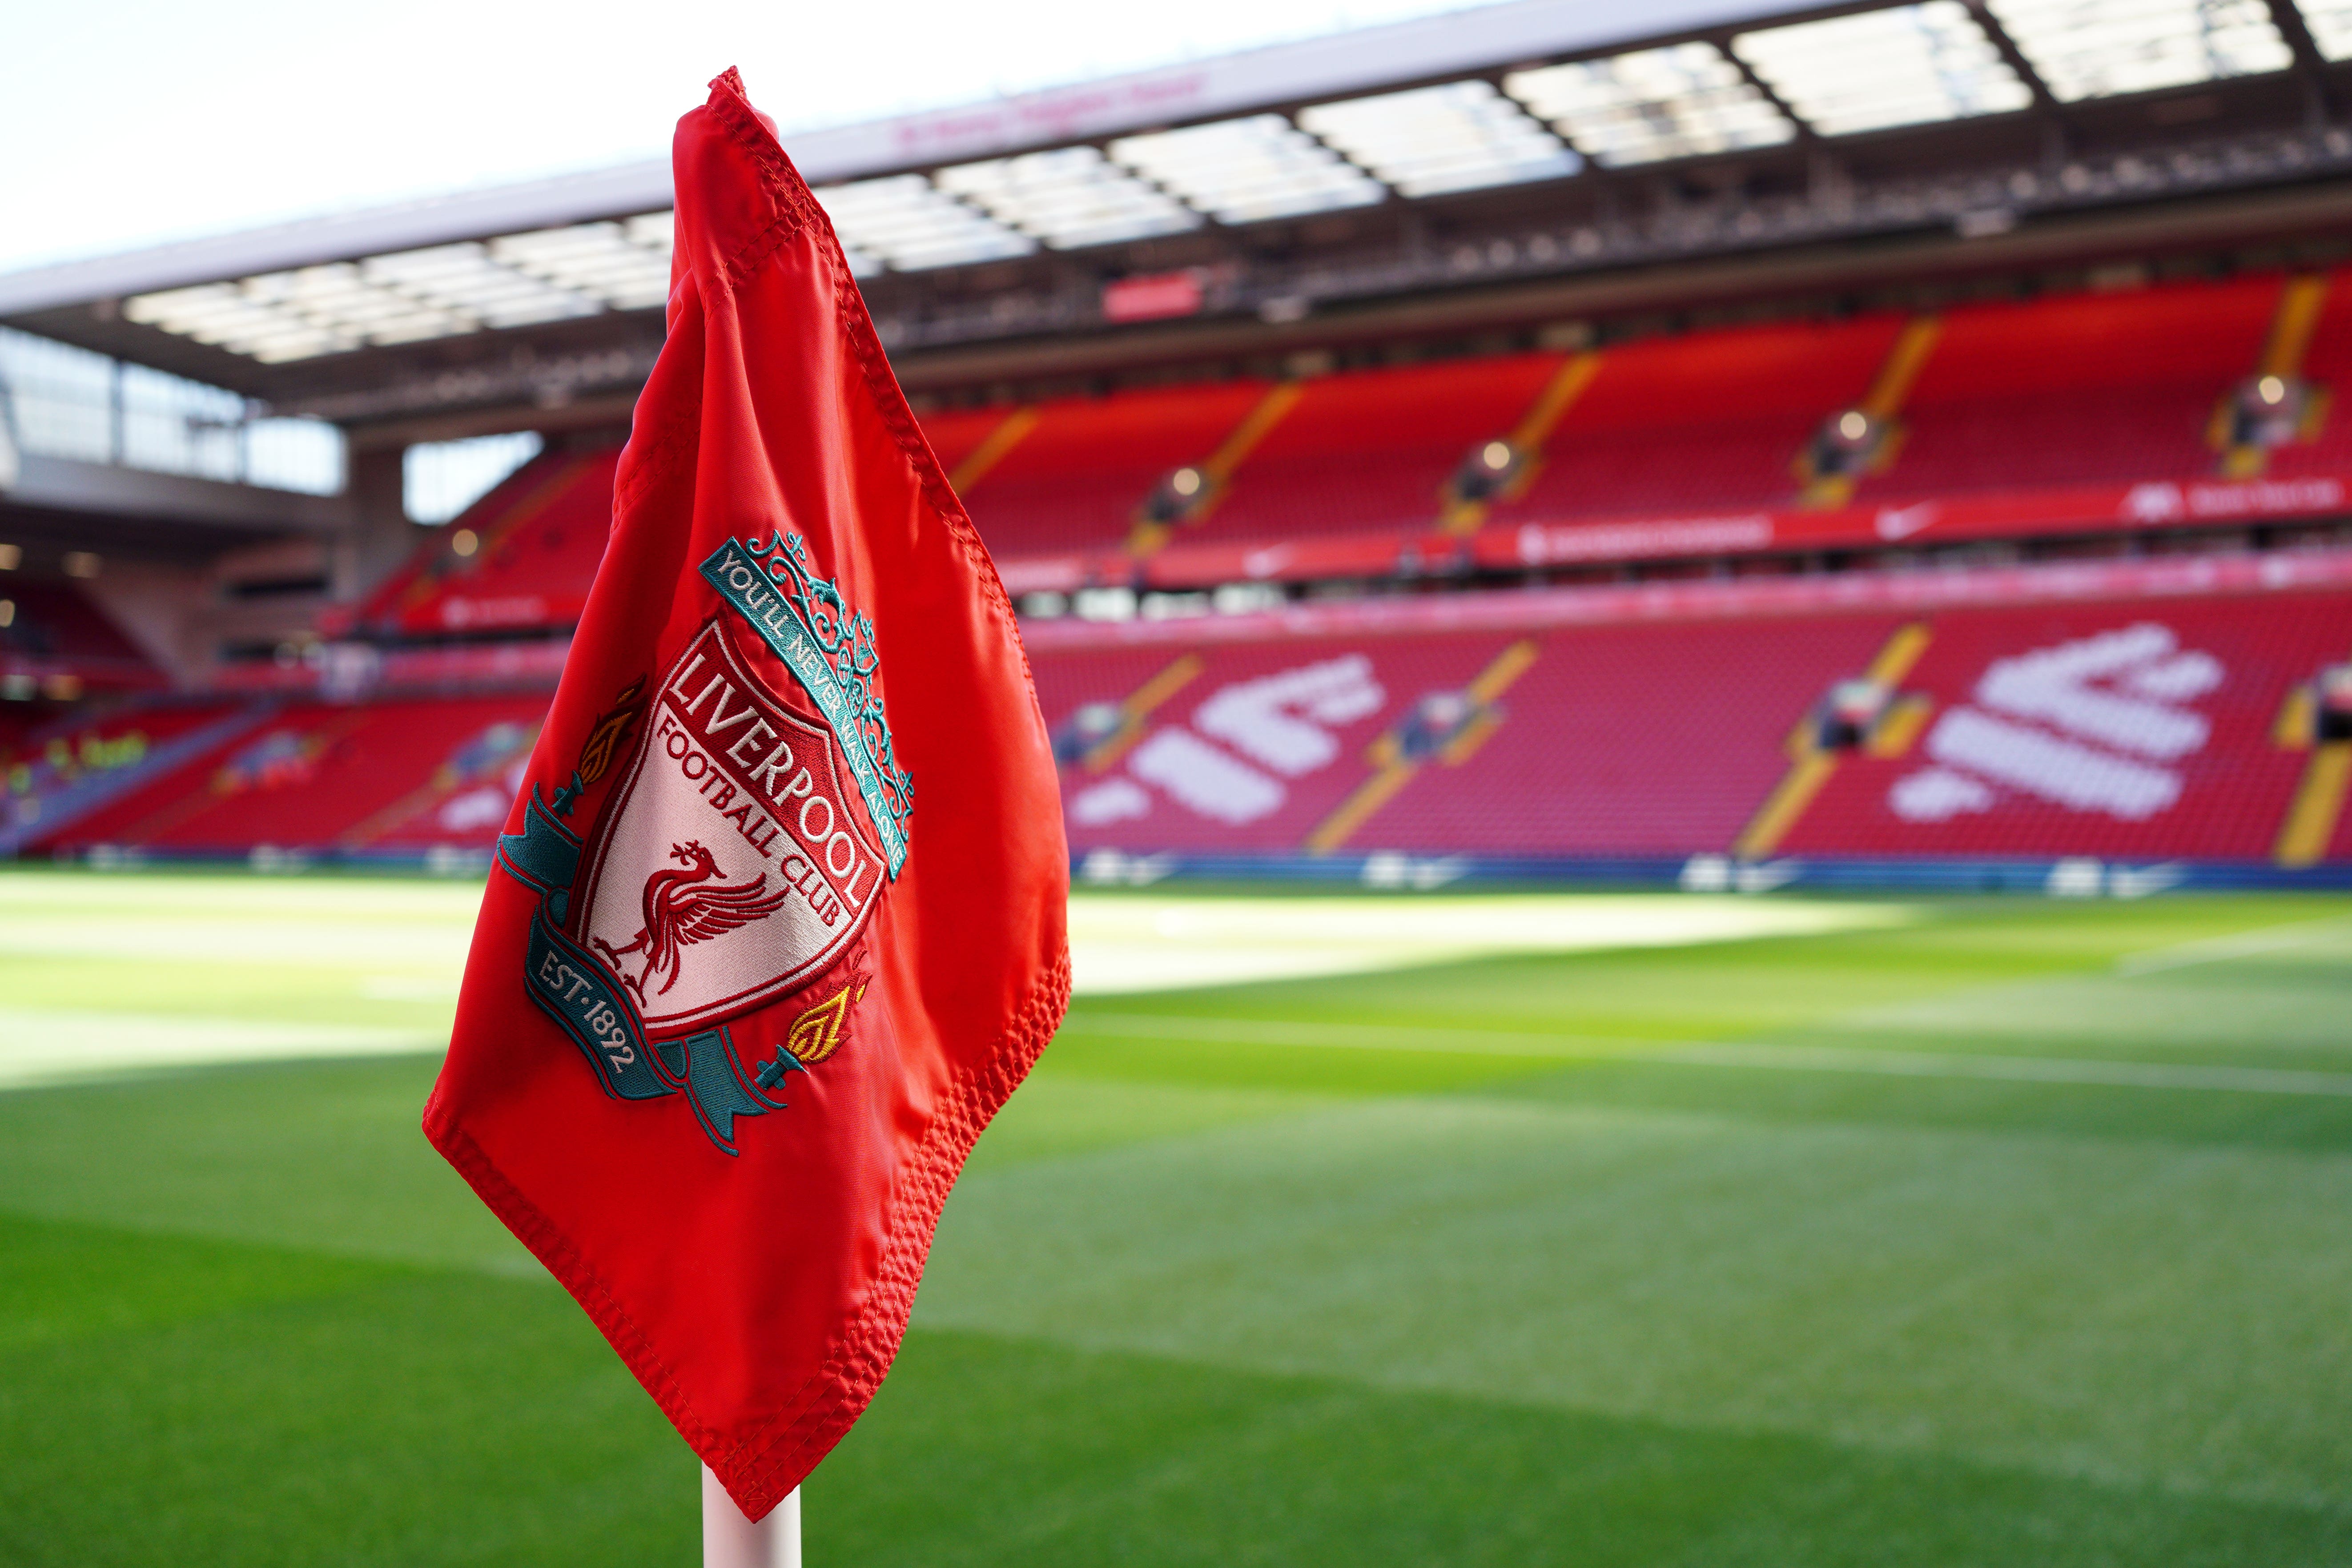 Three men have been arrested for alleged homophobic chanting at Anfield (Peter Byrne/PA)